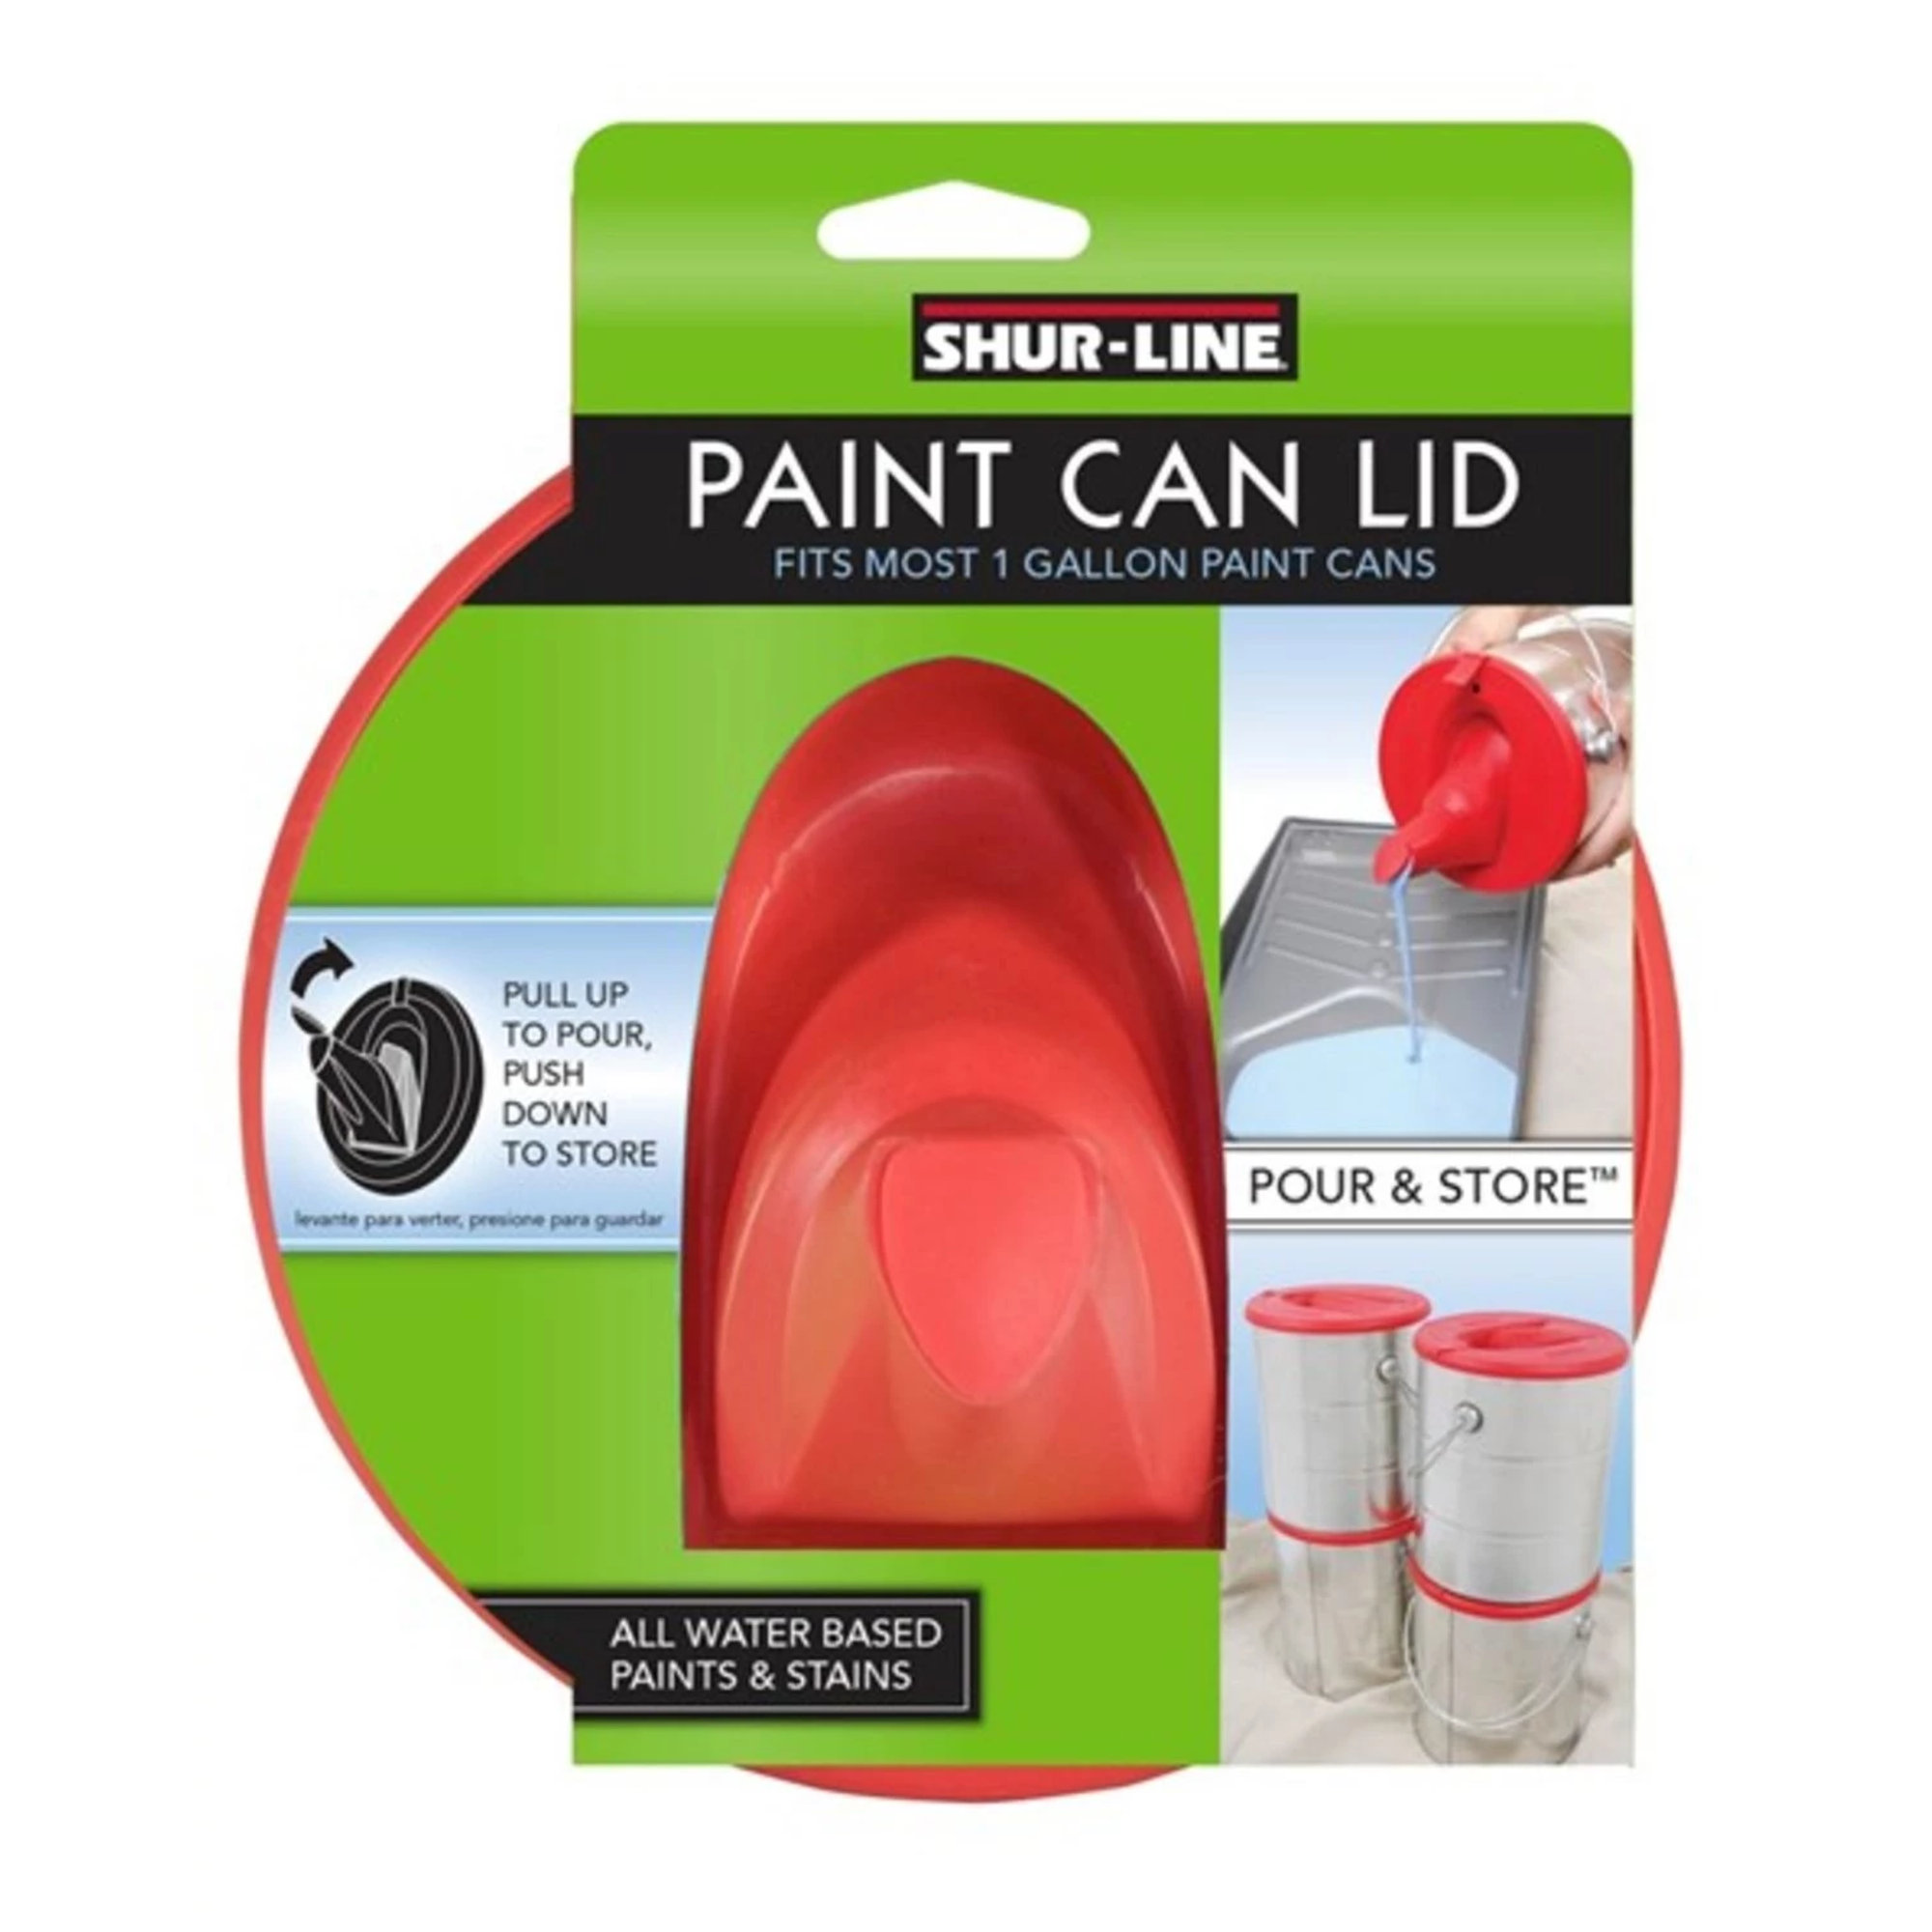 https://s7d2.scene7.com/is/image/sherwinwilliams/650950769-shurline-paint-can-lid-1-gallon?fit=constrain,1&wid=2000